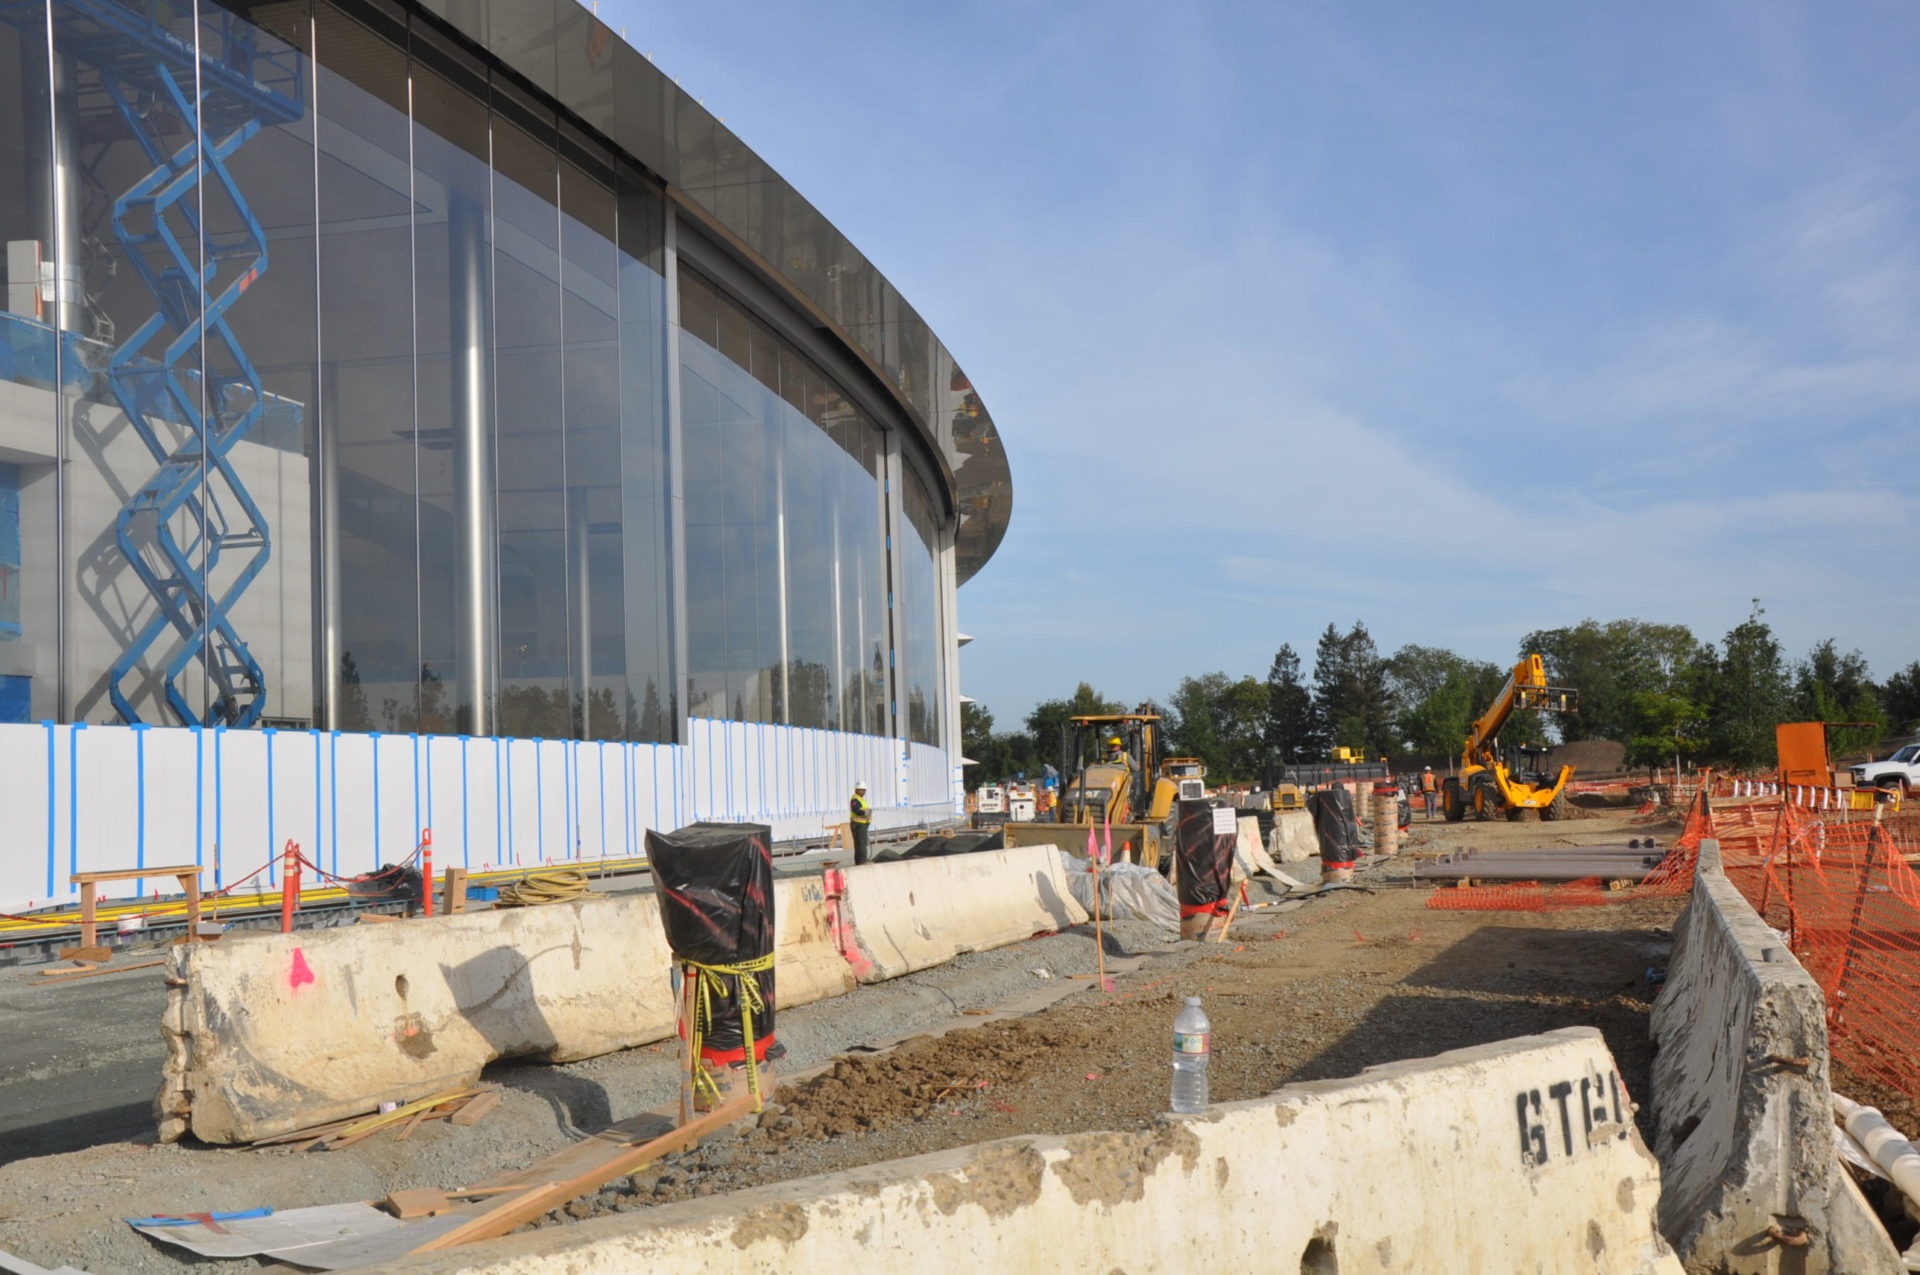 Image from the Gallery: Apple Campus 2 – Cupertino, CA